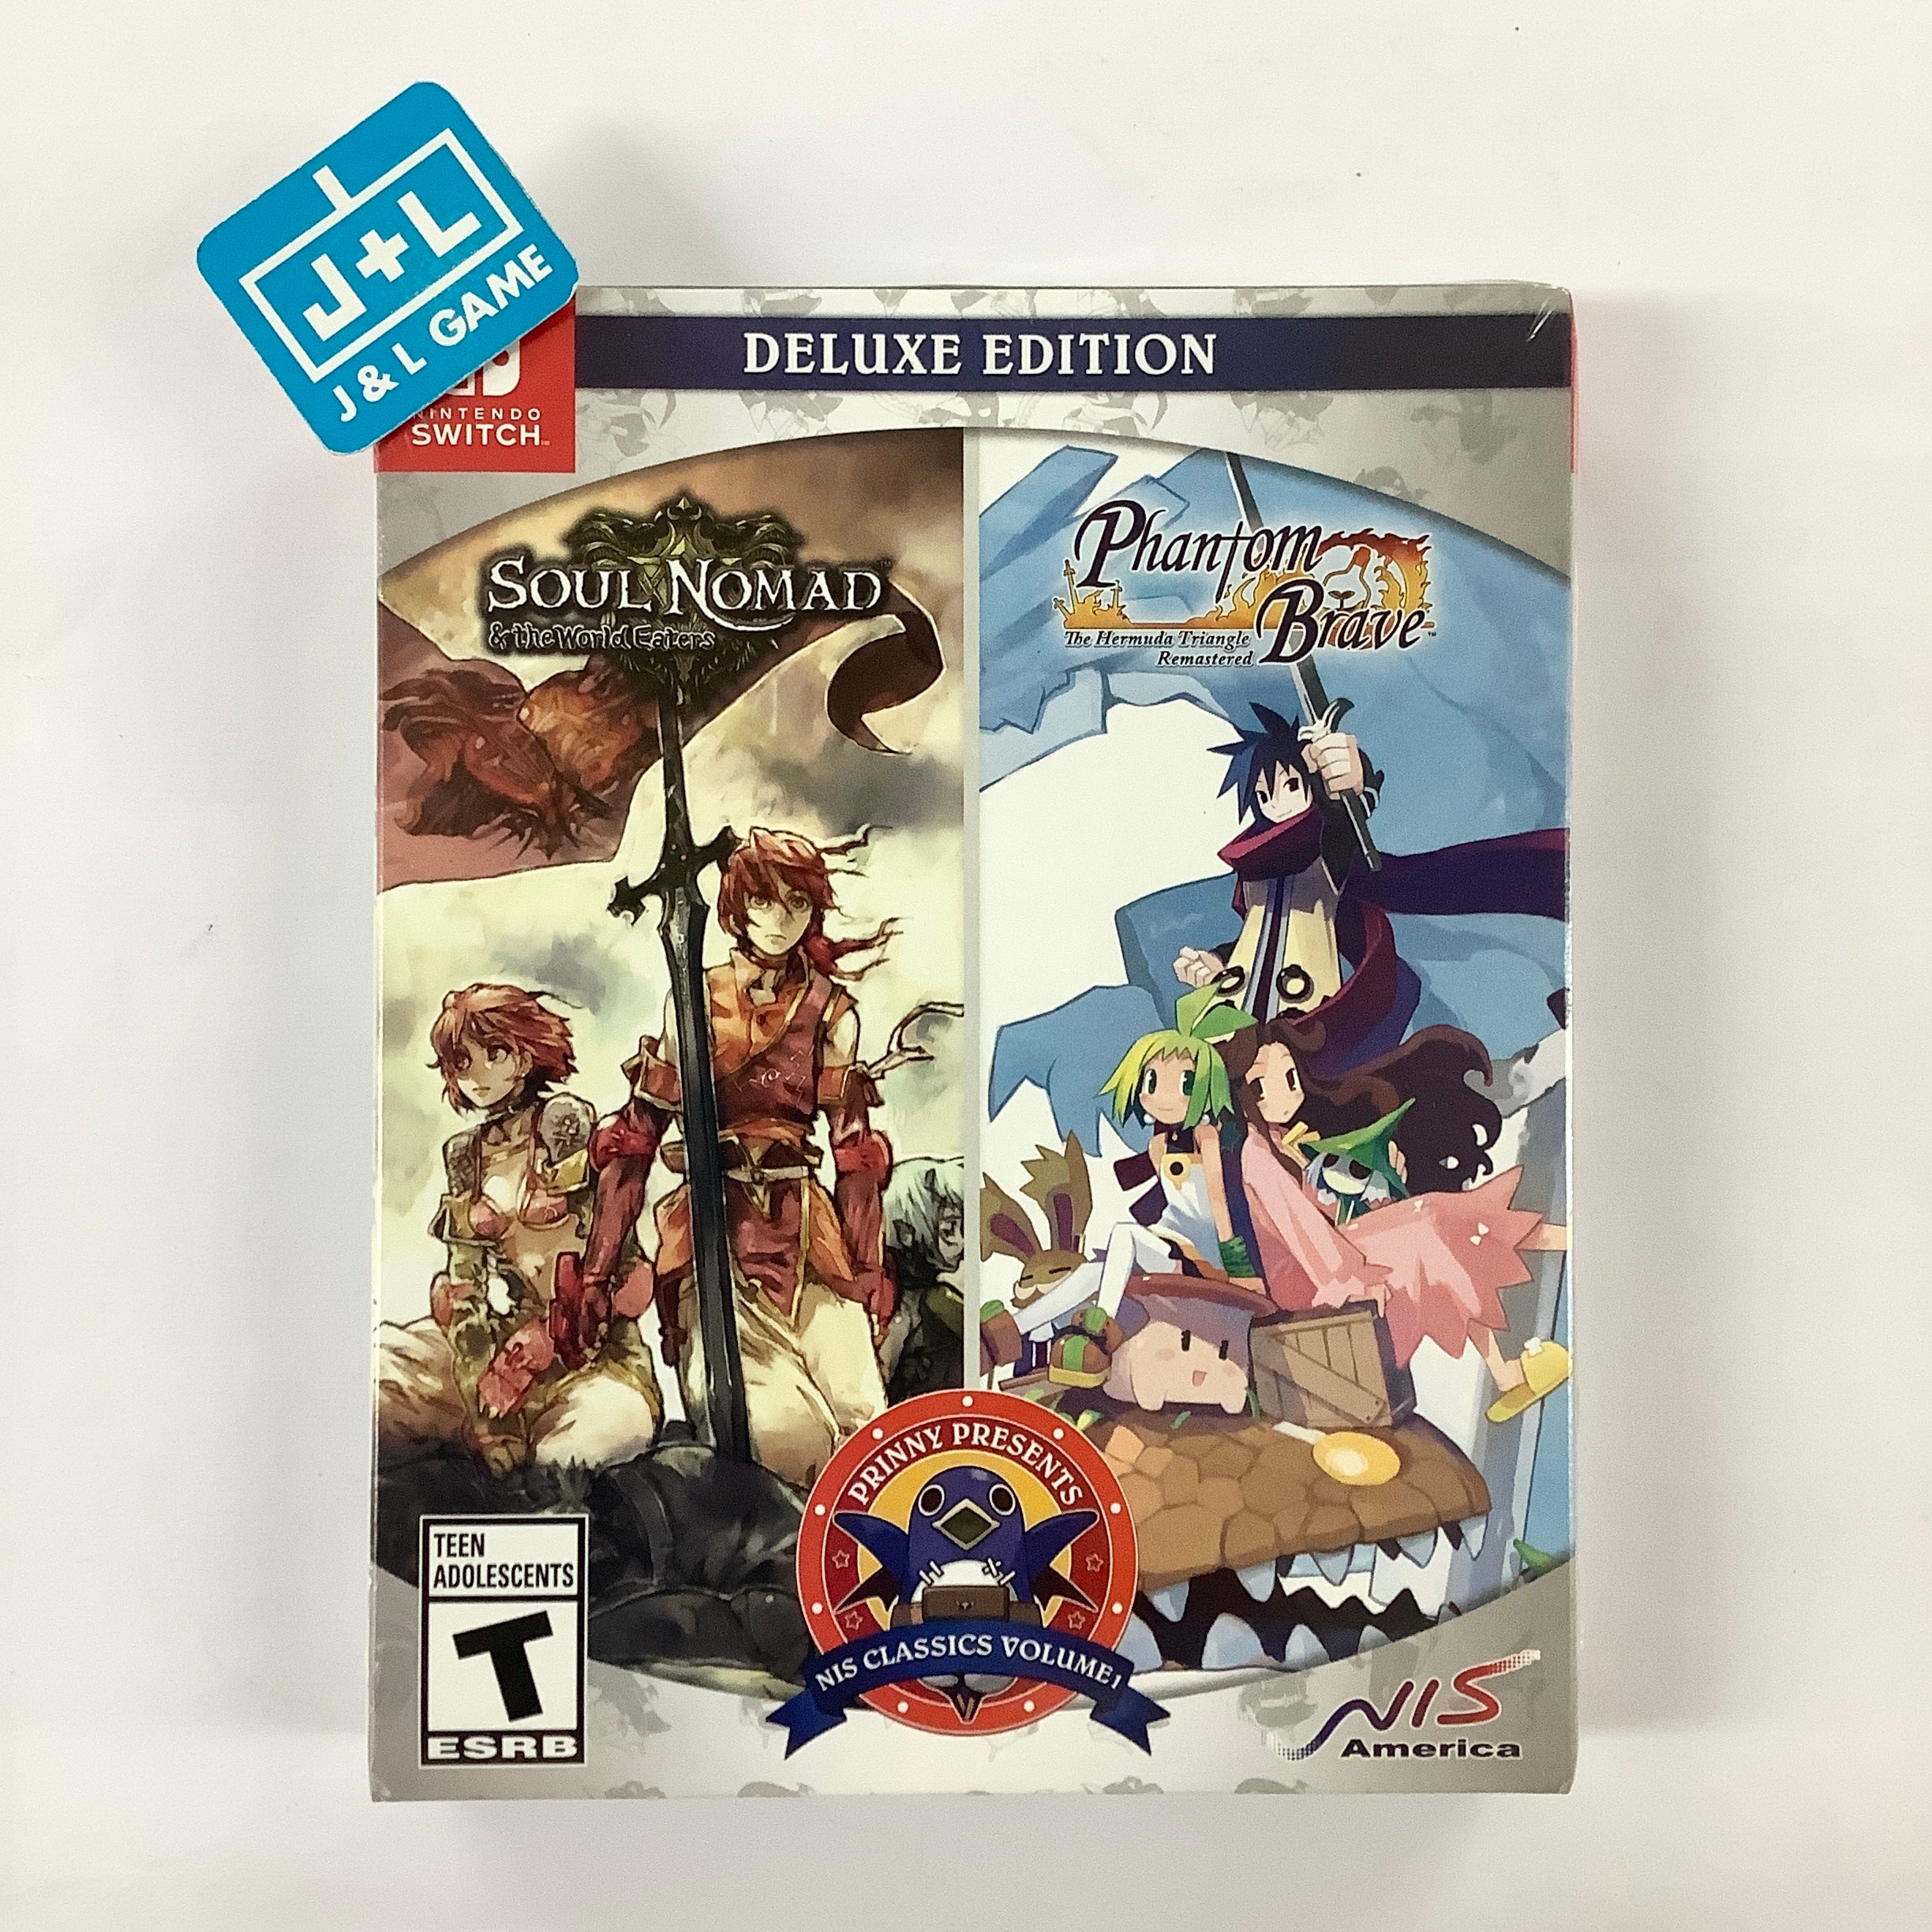 Prinny Presents NIS Classics Volume 1 Deluxe Edition - (NSW) Nintendo Switch Video Games NIS America   